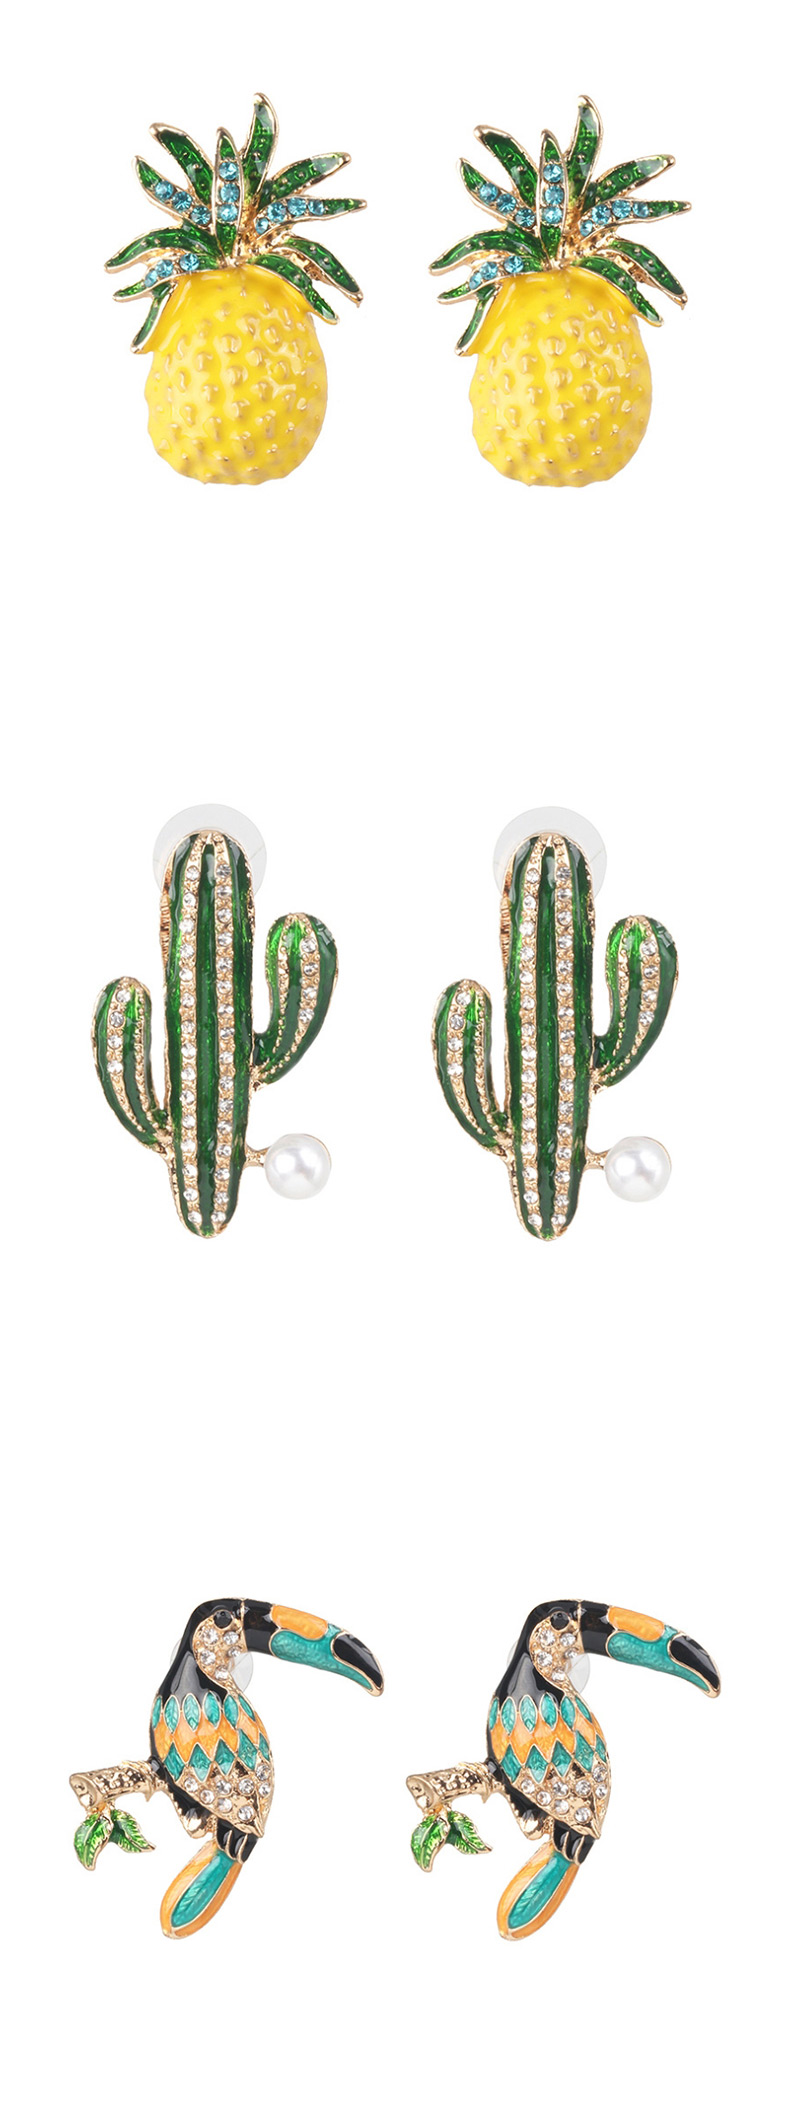 Fashion Cactus Insect Earring,Stud Earrings